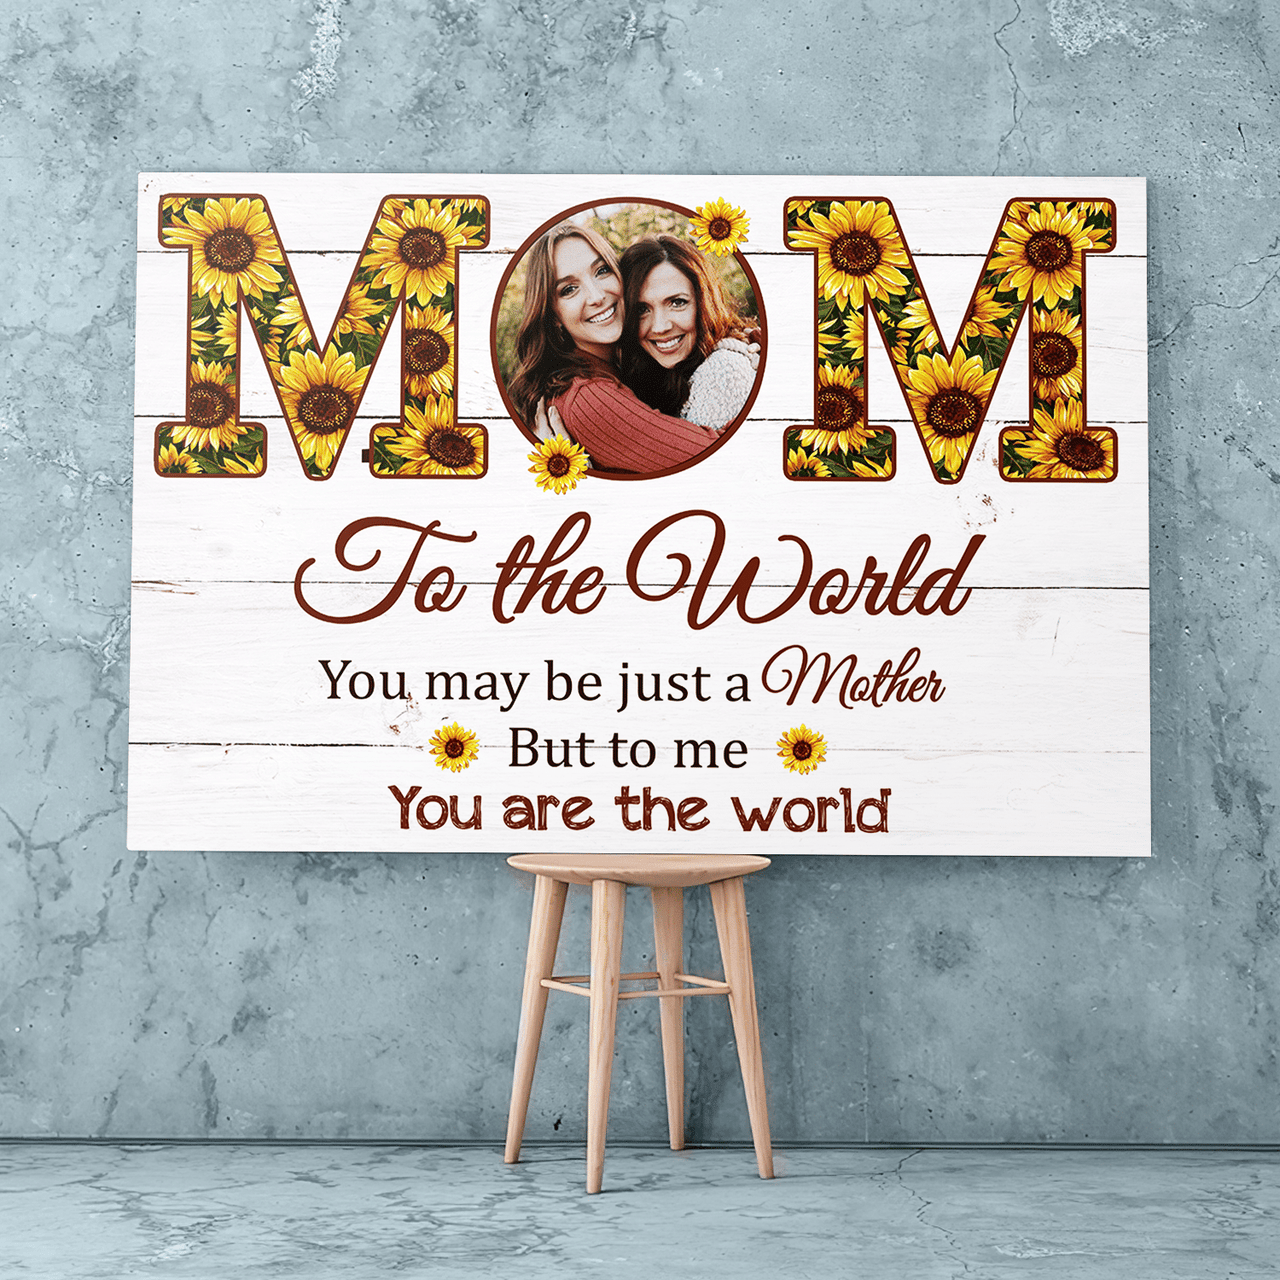 Personalized To My Mom Wall Art Canvas, Mother's Day Canvas For Mom, Daughter Mom Wall Decor